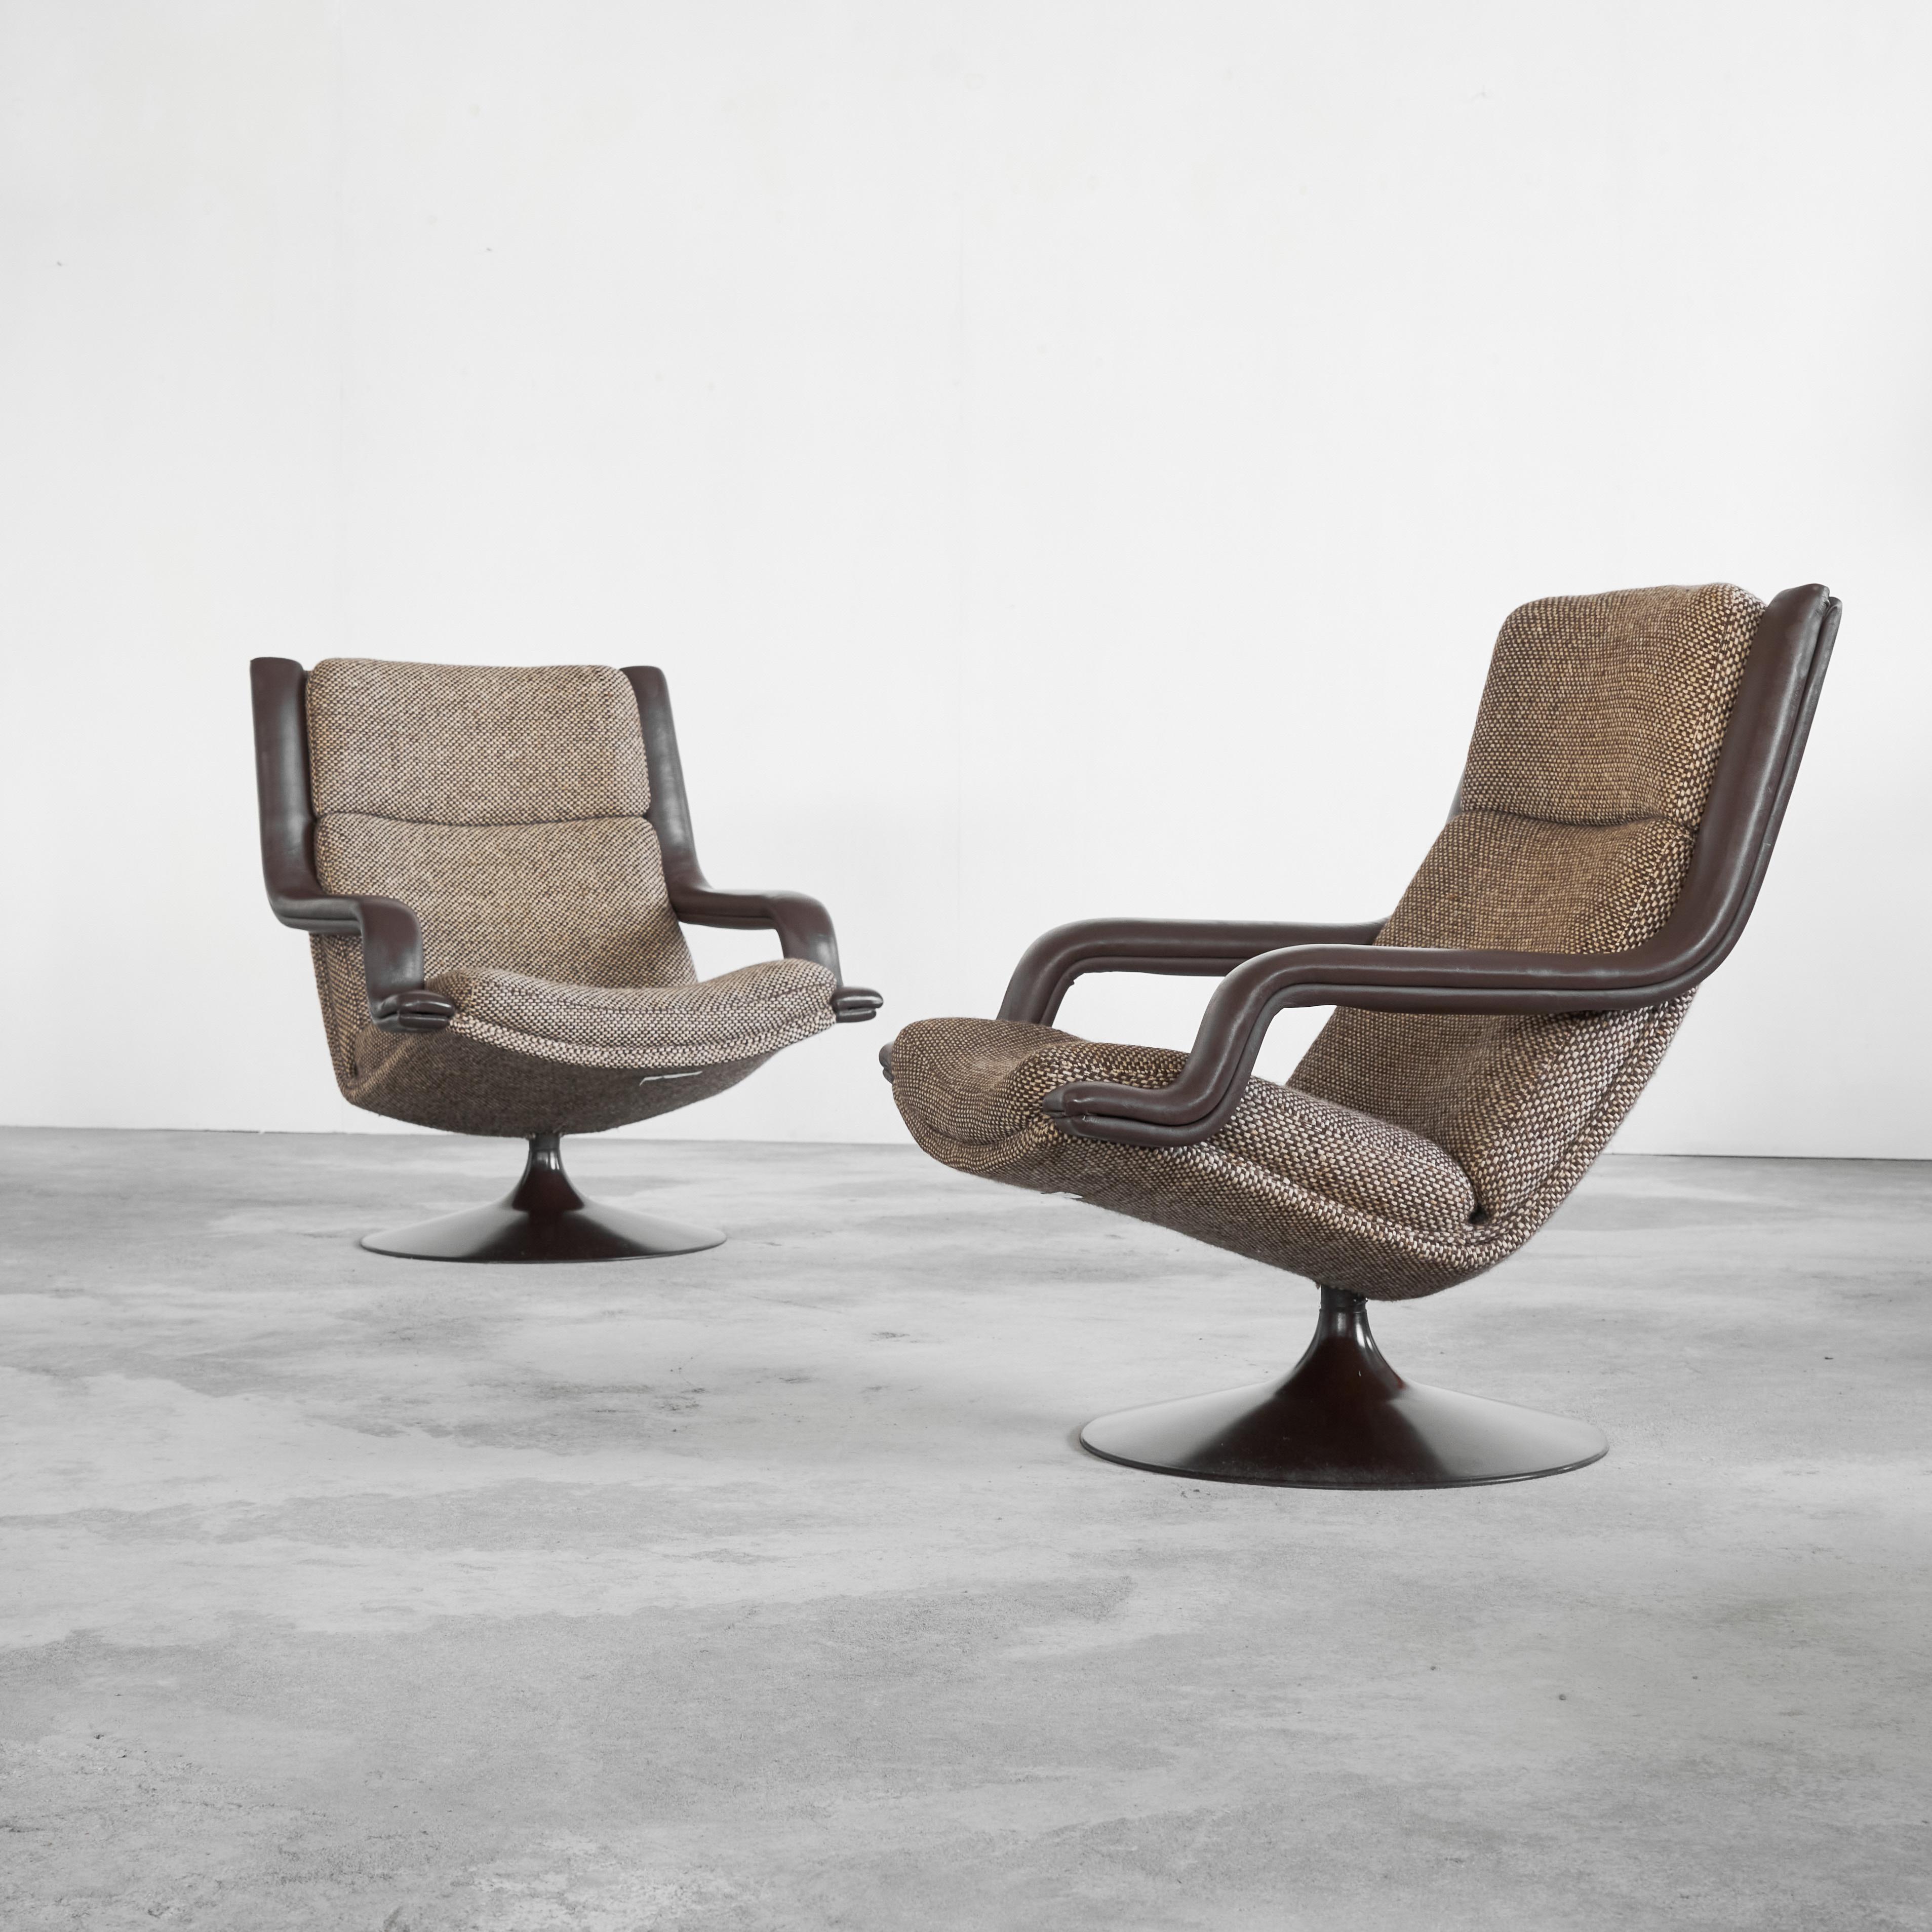 Geoffrey Harcourt Pair of F152 Lounge Chairs with Ottoman for Artifort 1975 For Sale 10